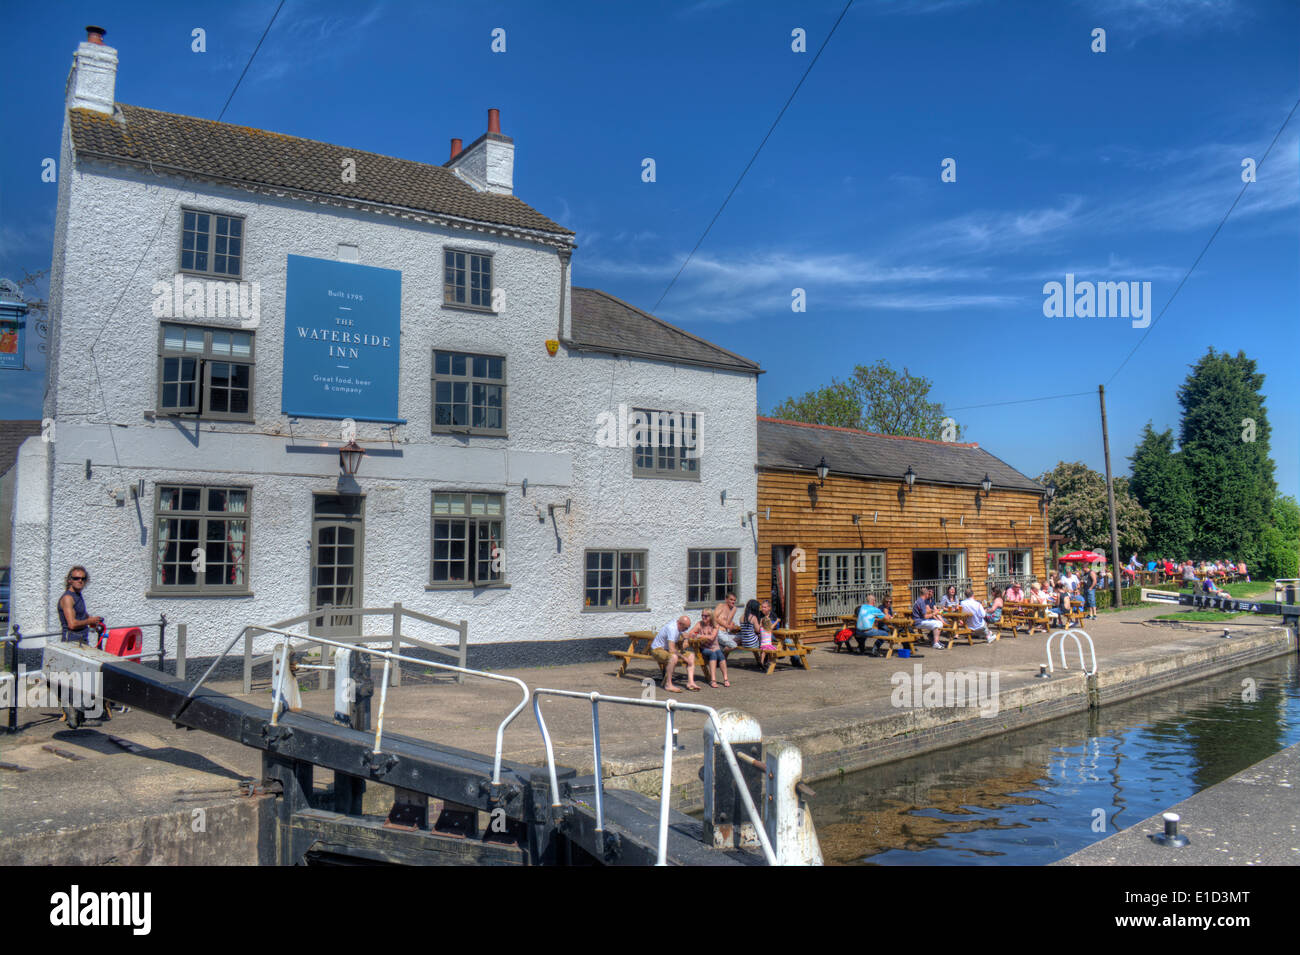 HDR image of The Waterside Inn and Mountsorrel Lock on the River Soar, Leicestershire England Stock Photo